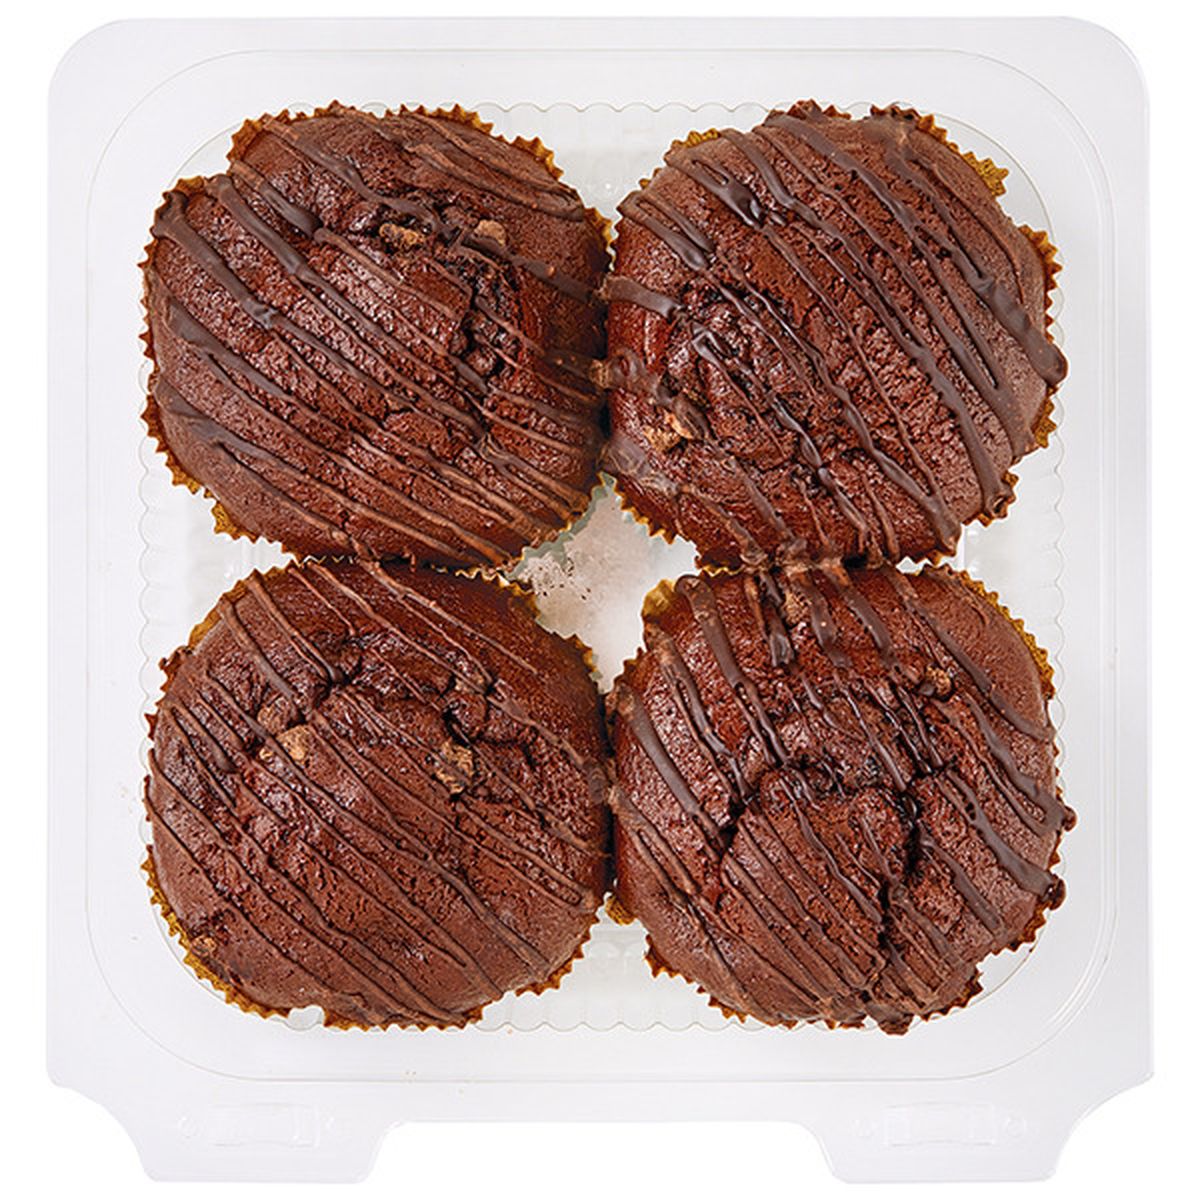 Calories in Wegmans Muffins, Double Chocolate, 4 Pack